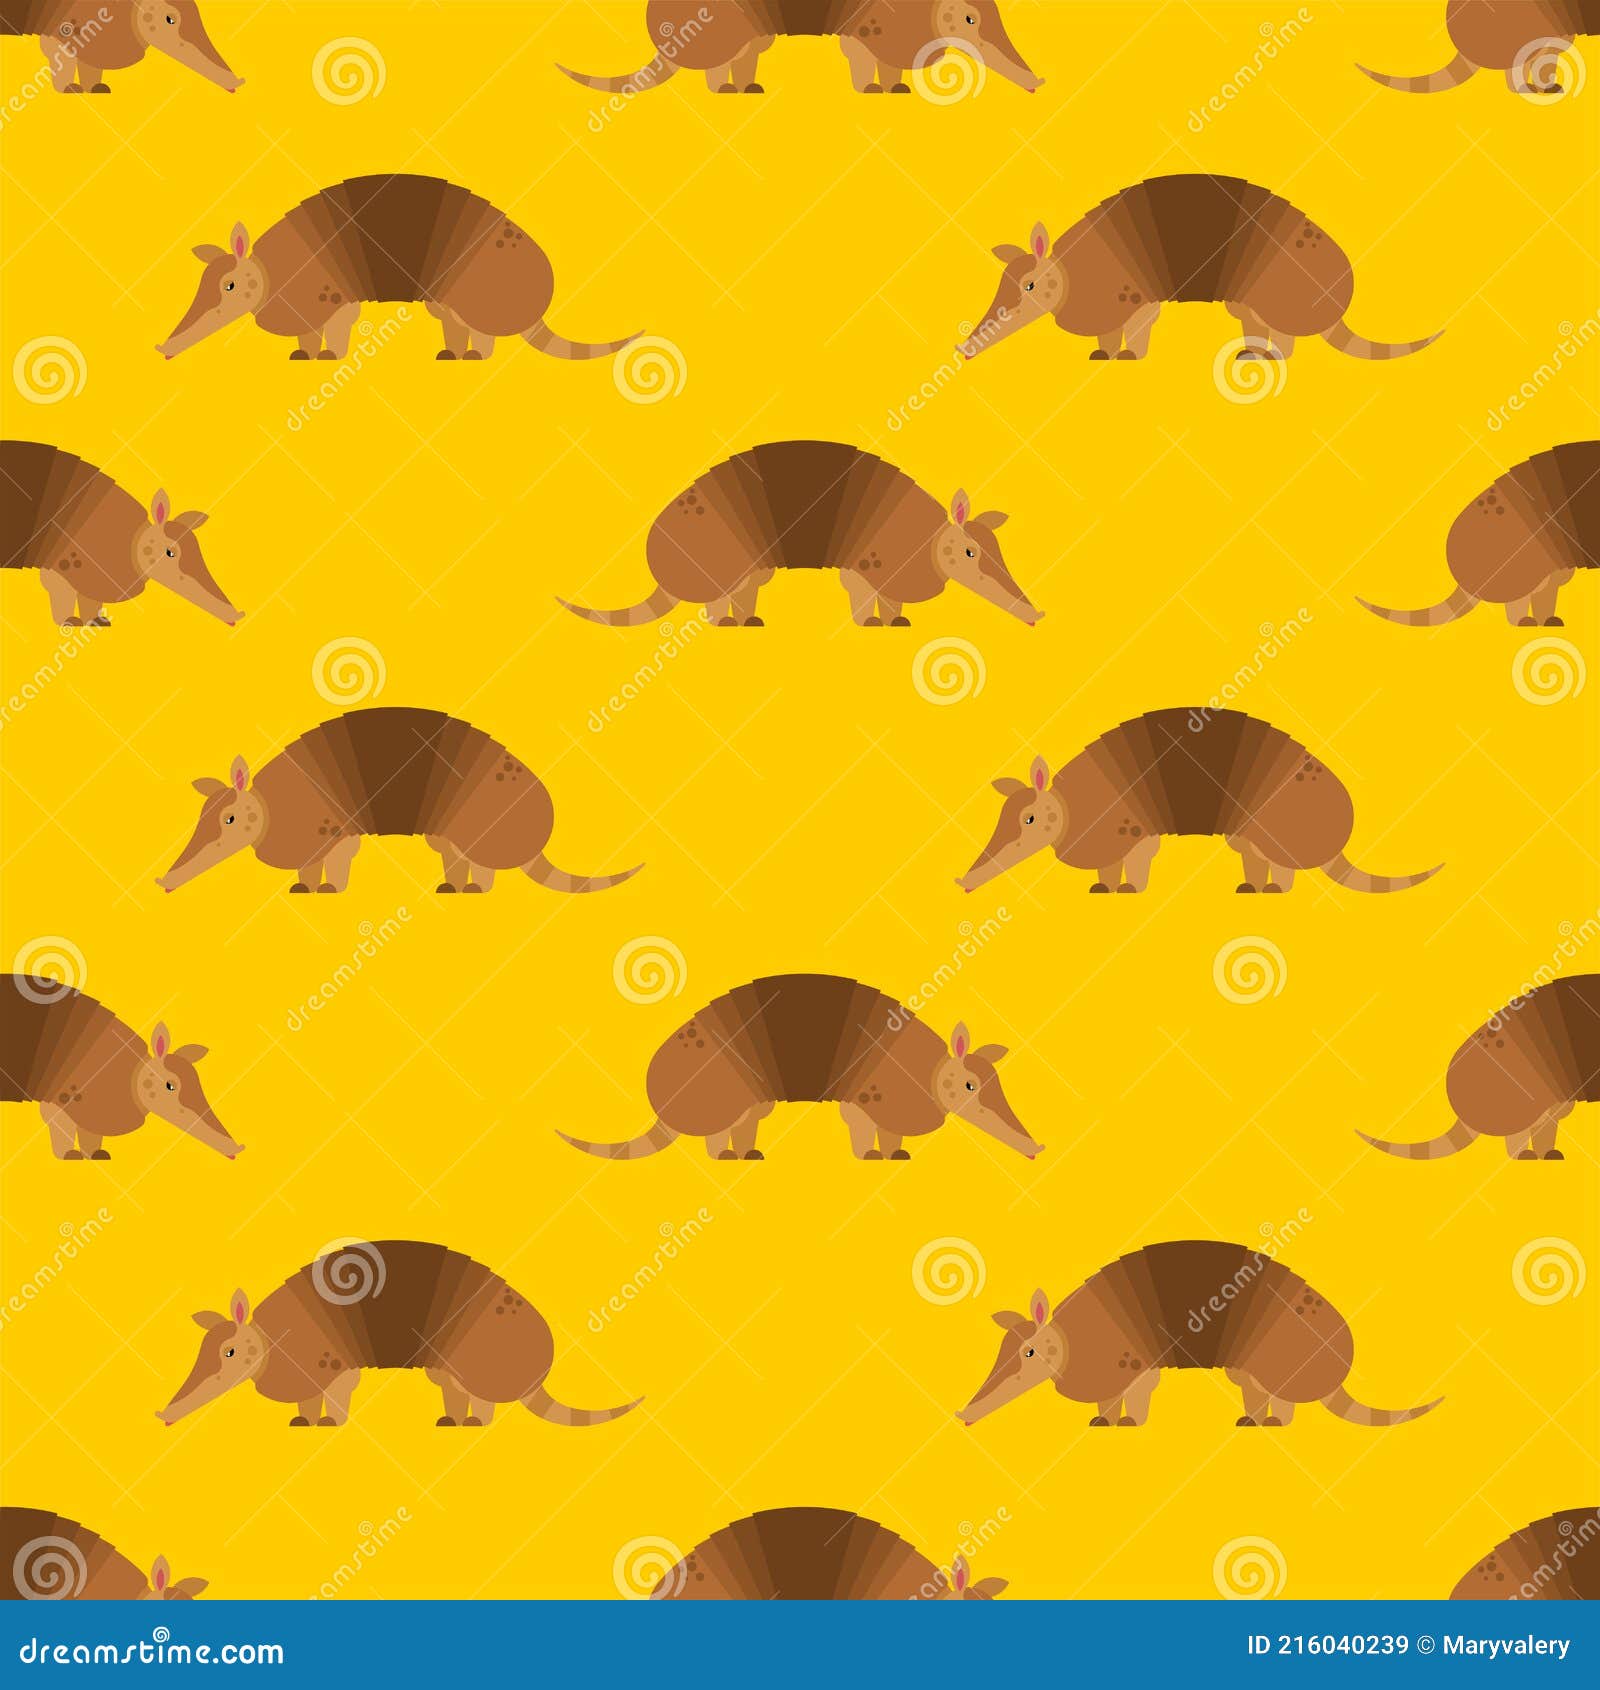 armadillo pattern seamless. animal armor-clad background. baby fabric ornament